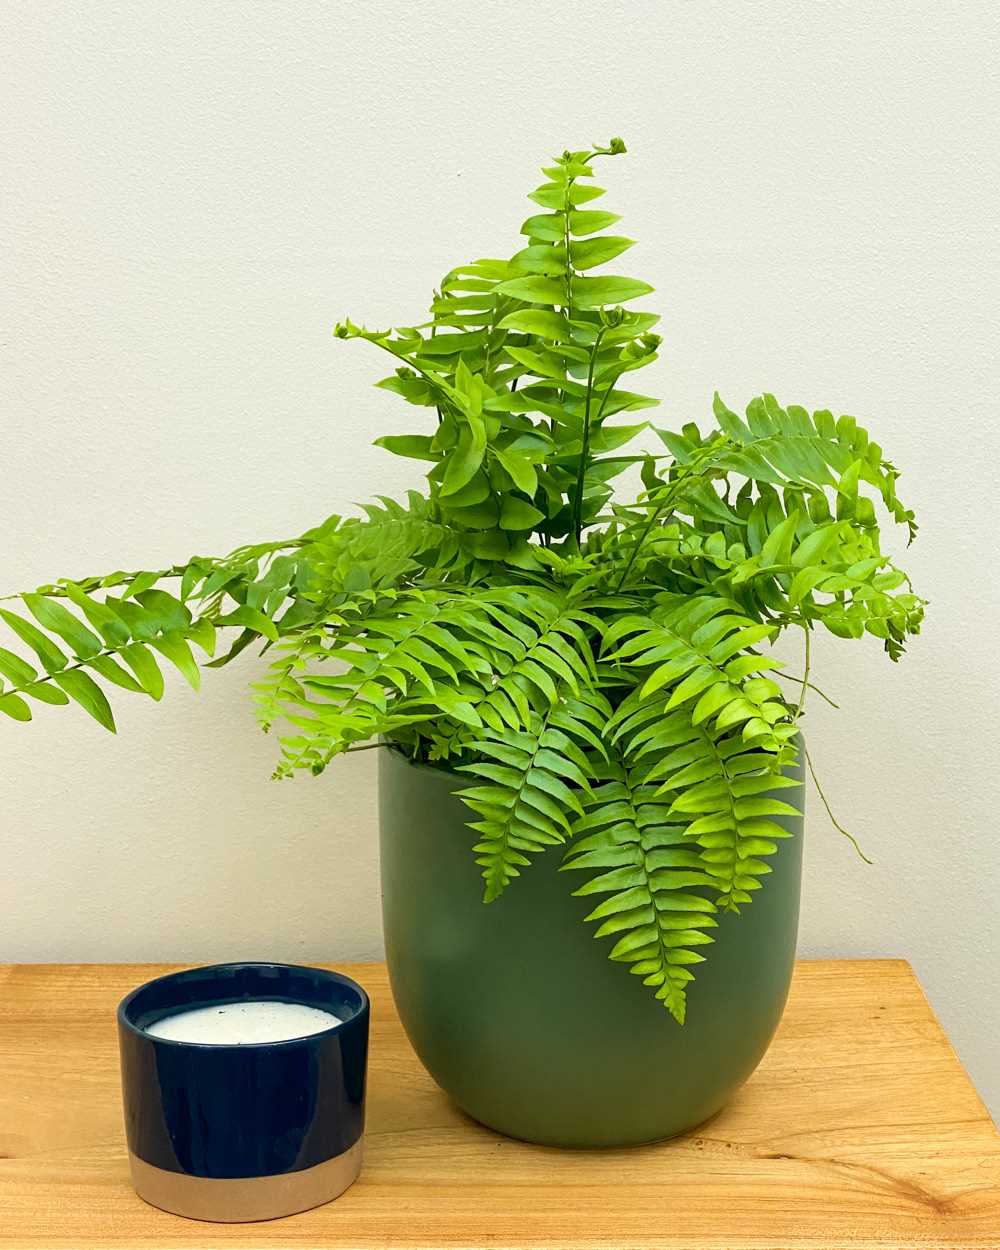 Macho Fern A Comprehensive Guide to Growing and Caring for this Stunning Houseplant